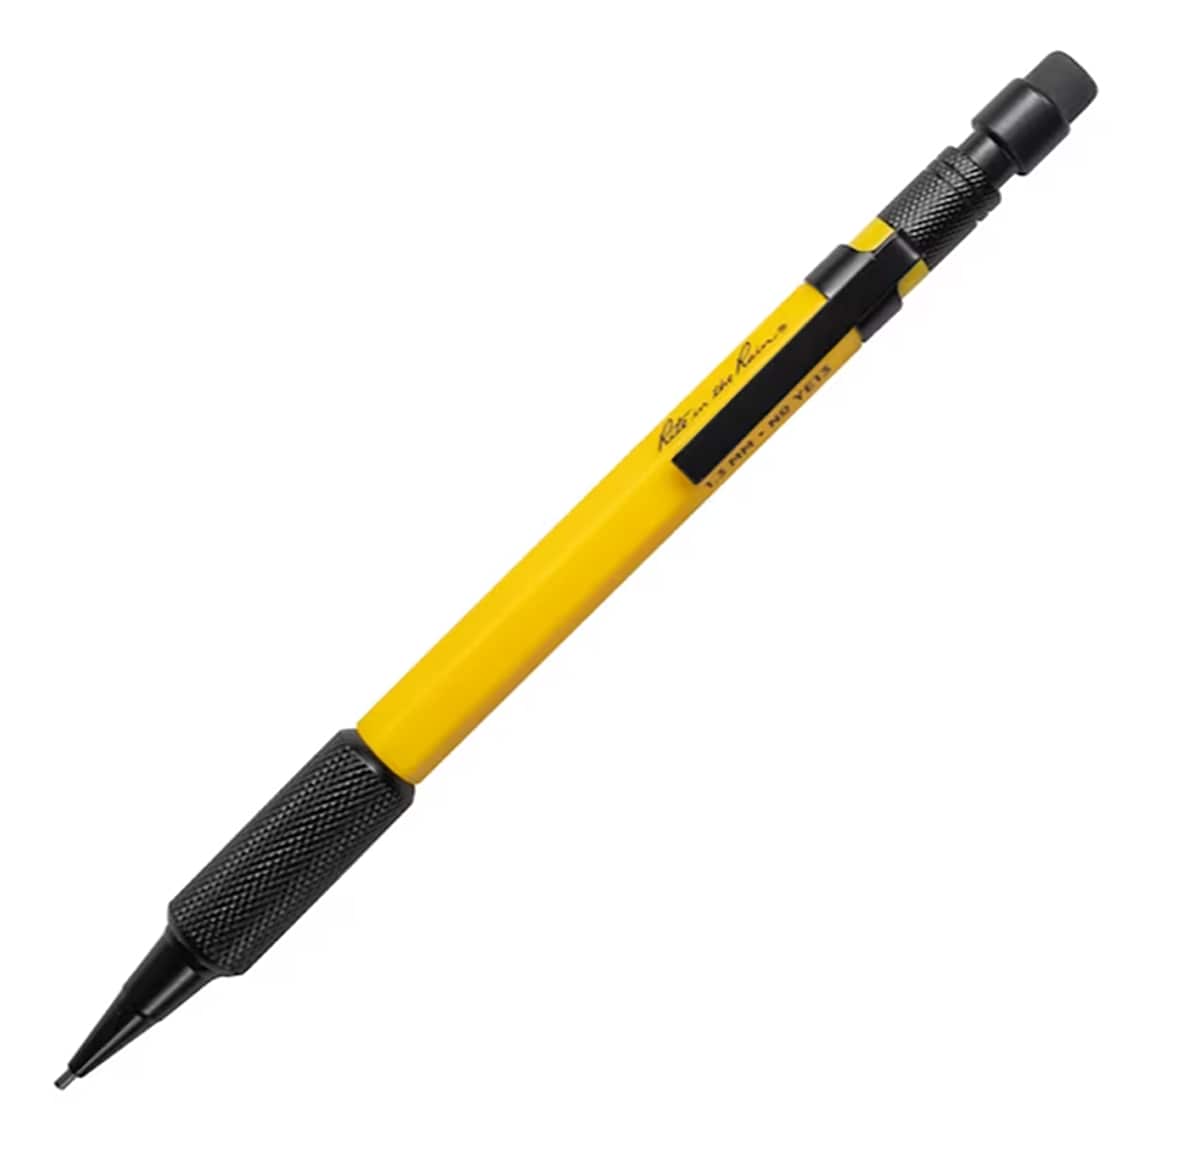 Rite in the Rain Yellow Mechanical Pencil - All-Weather, Durable Resin  Barrel - 5.75-in x 0.375 - Patented Tip, 7 Leads, 3 Erasers - Writing  Utensil in the Writing Utensils department at